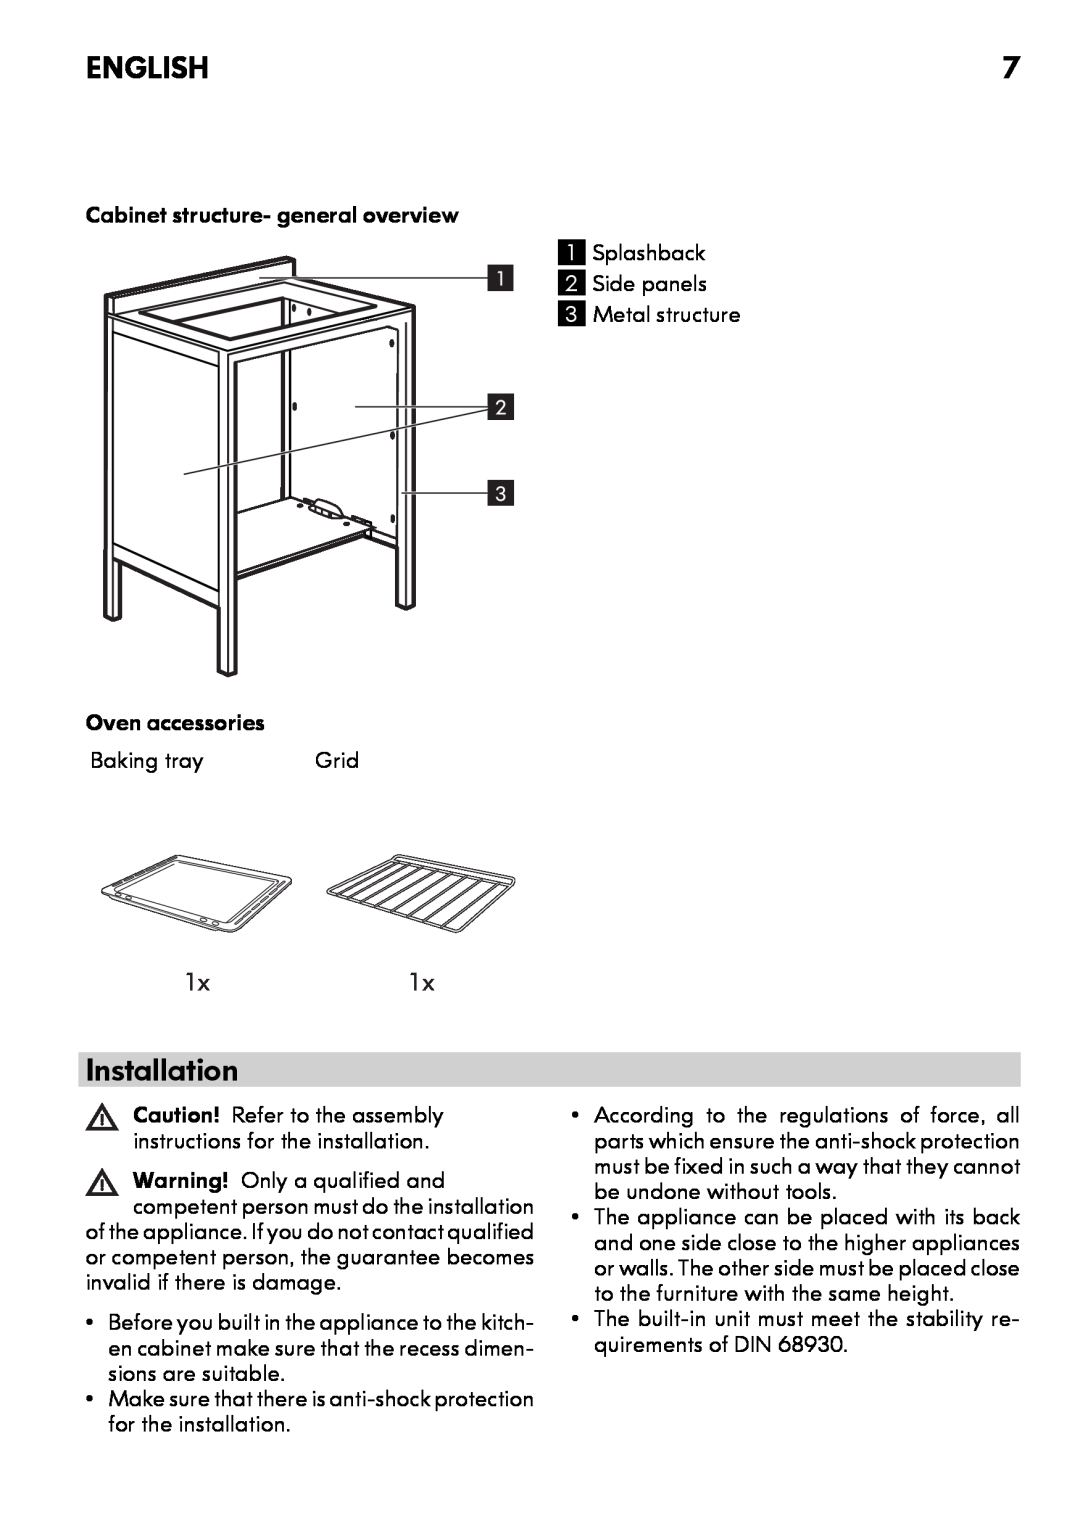 IKEA CG3 manual Installation, English, 1x1x, Cabinet structure- general overview 1 Splashback 1 2 Side panels 